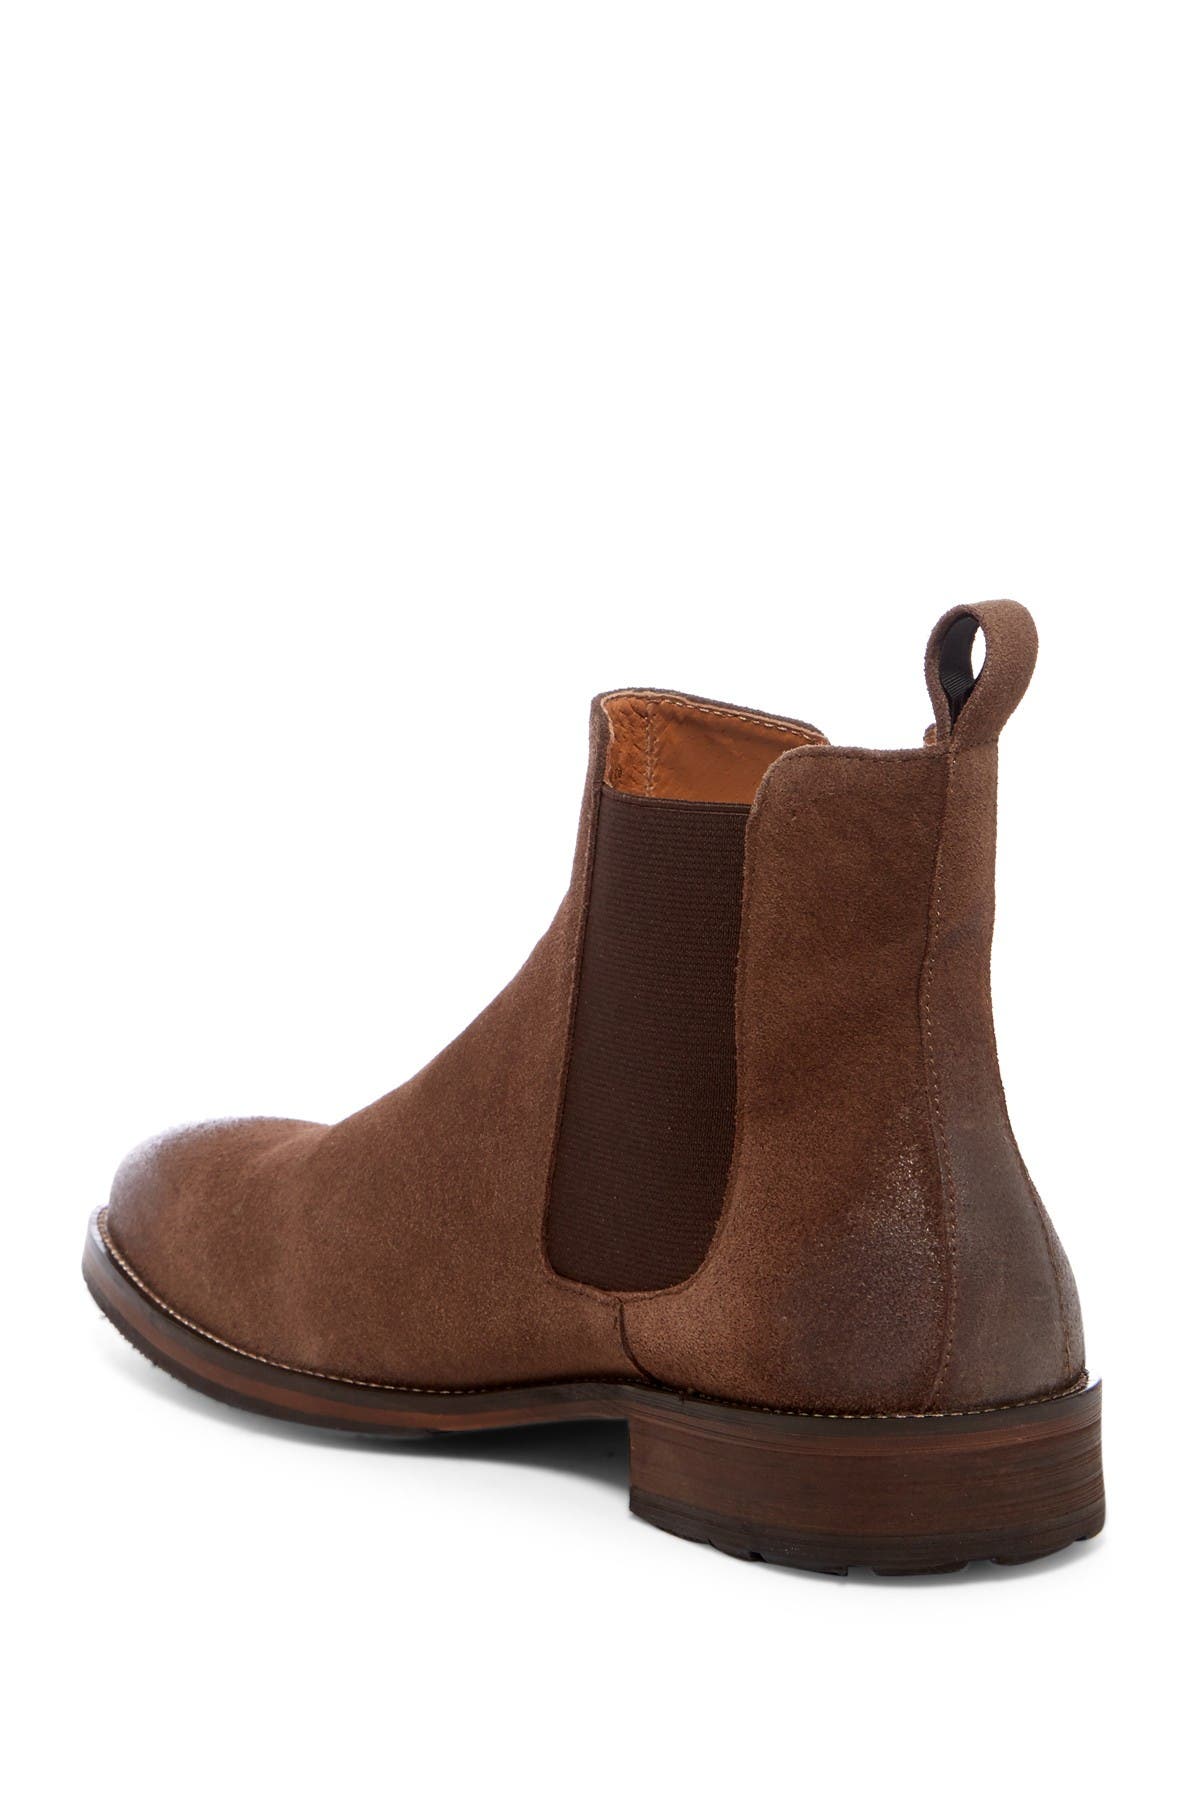 Vintage Foundry | Dress Sports Suede Chelsea Boot | Nordstrom Rack